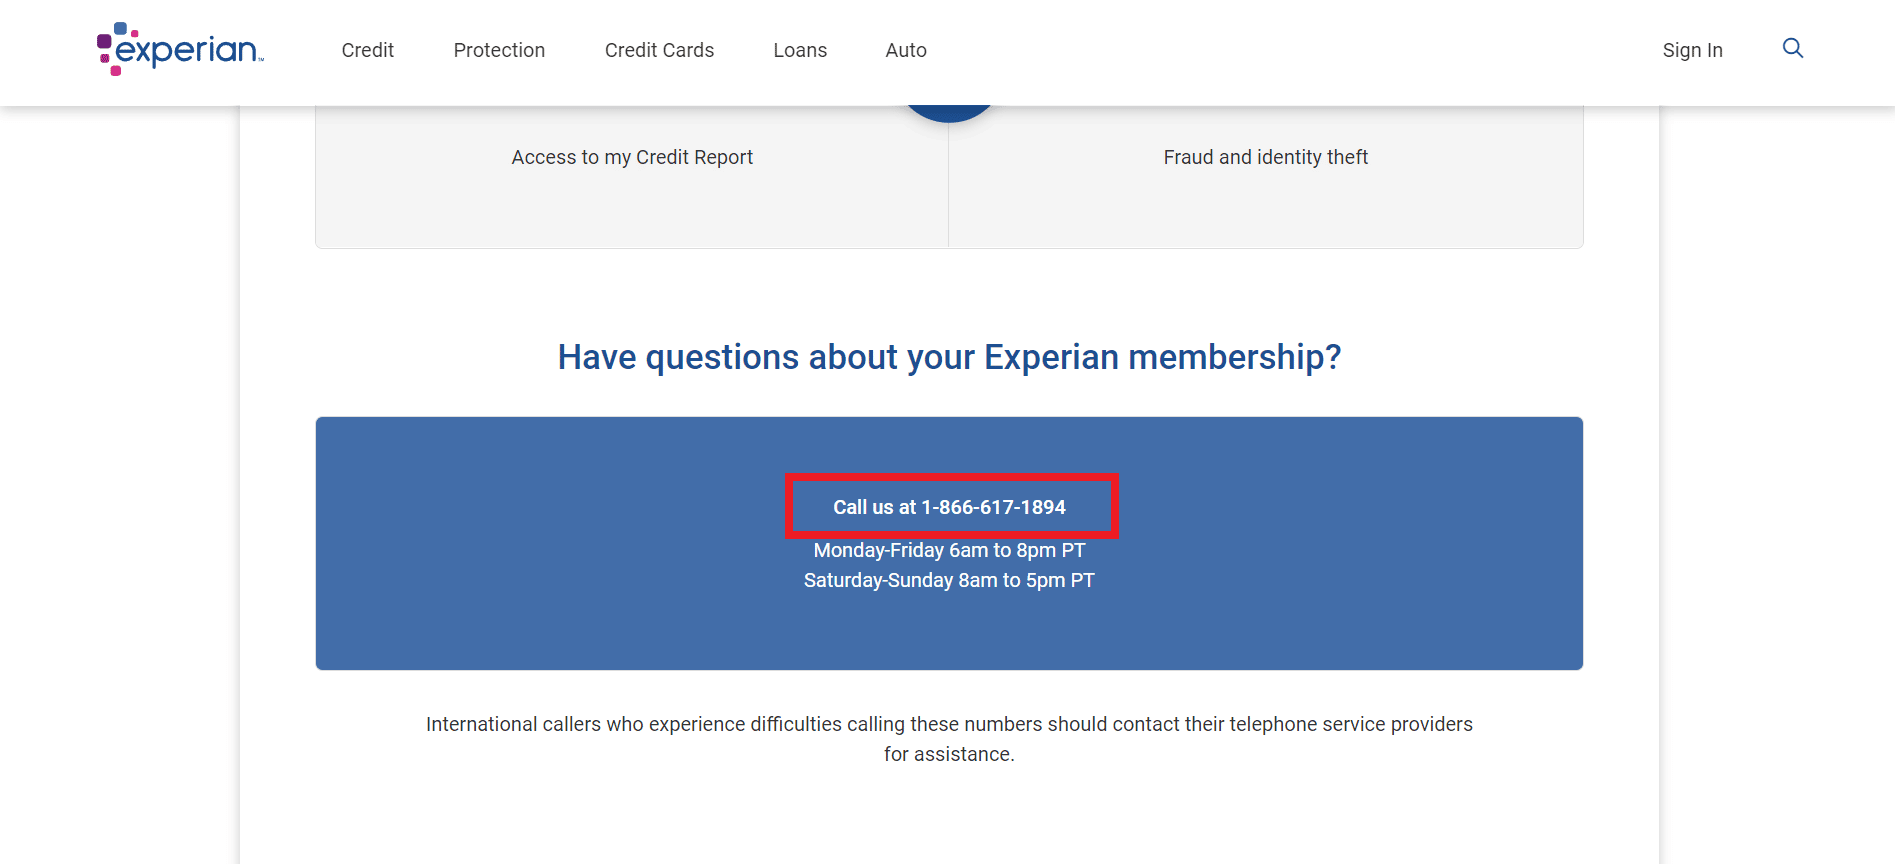 Contact Experian Membership Customer Service | unsubscribe from Experian emails